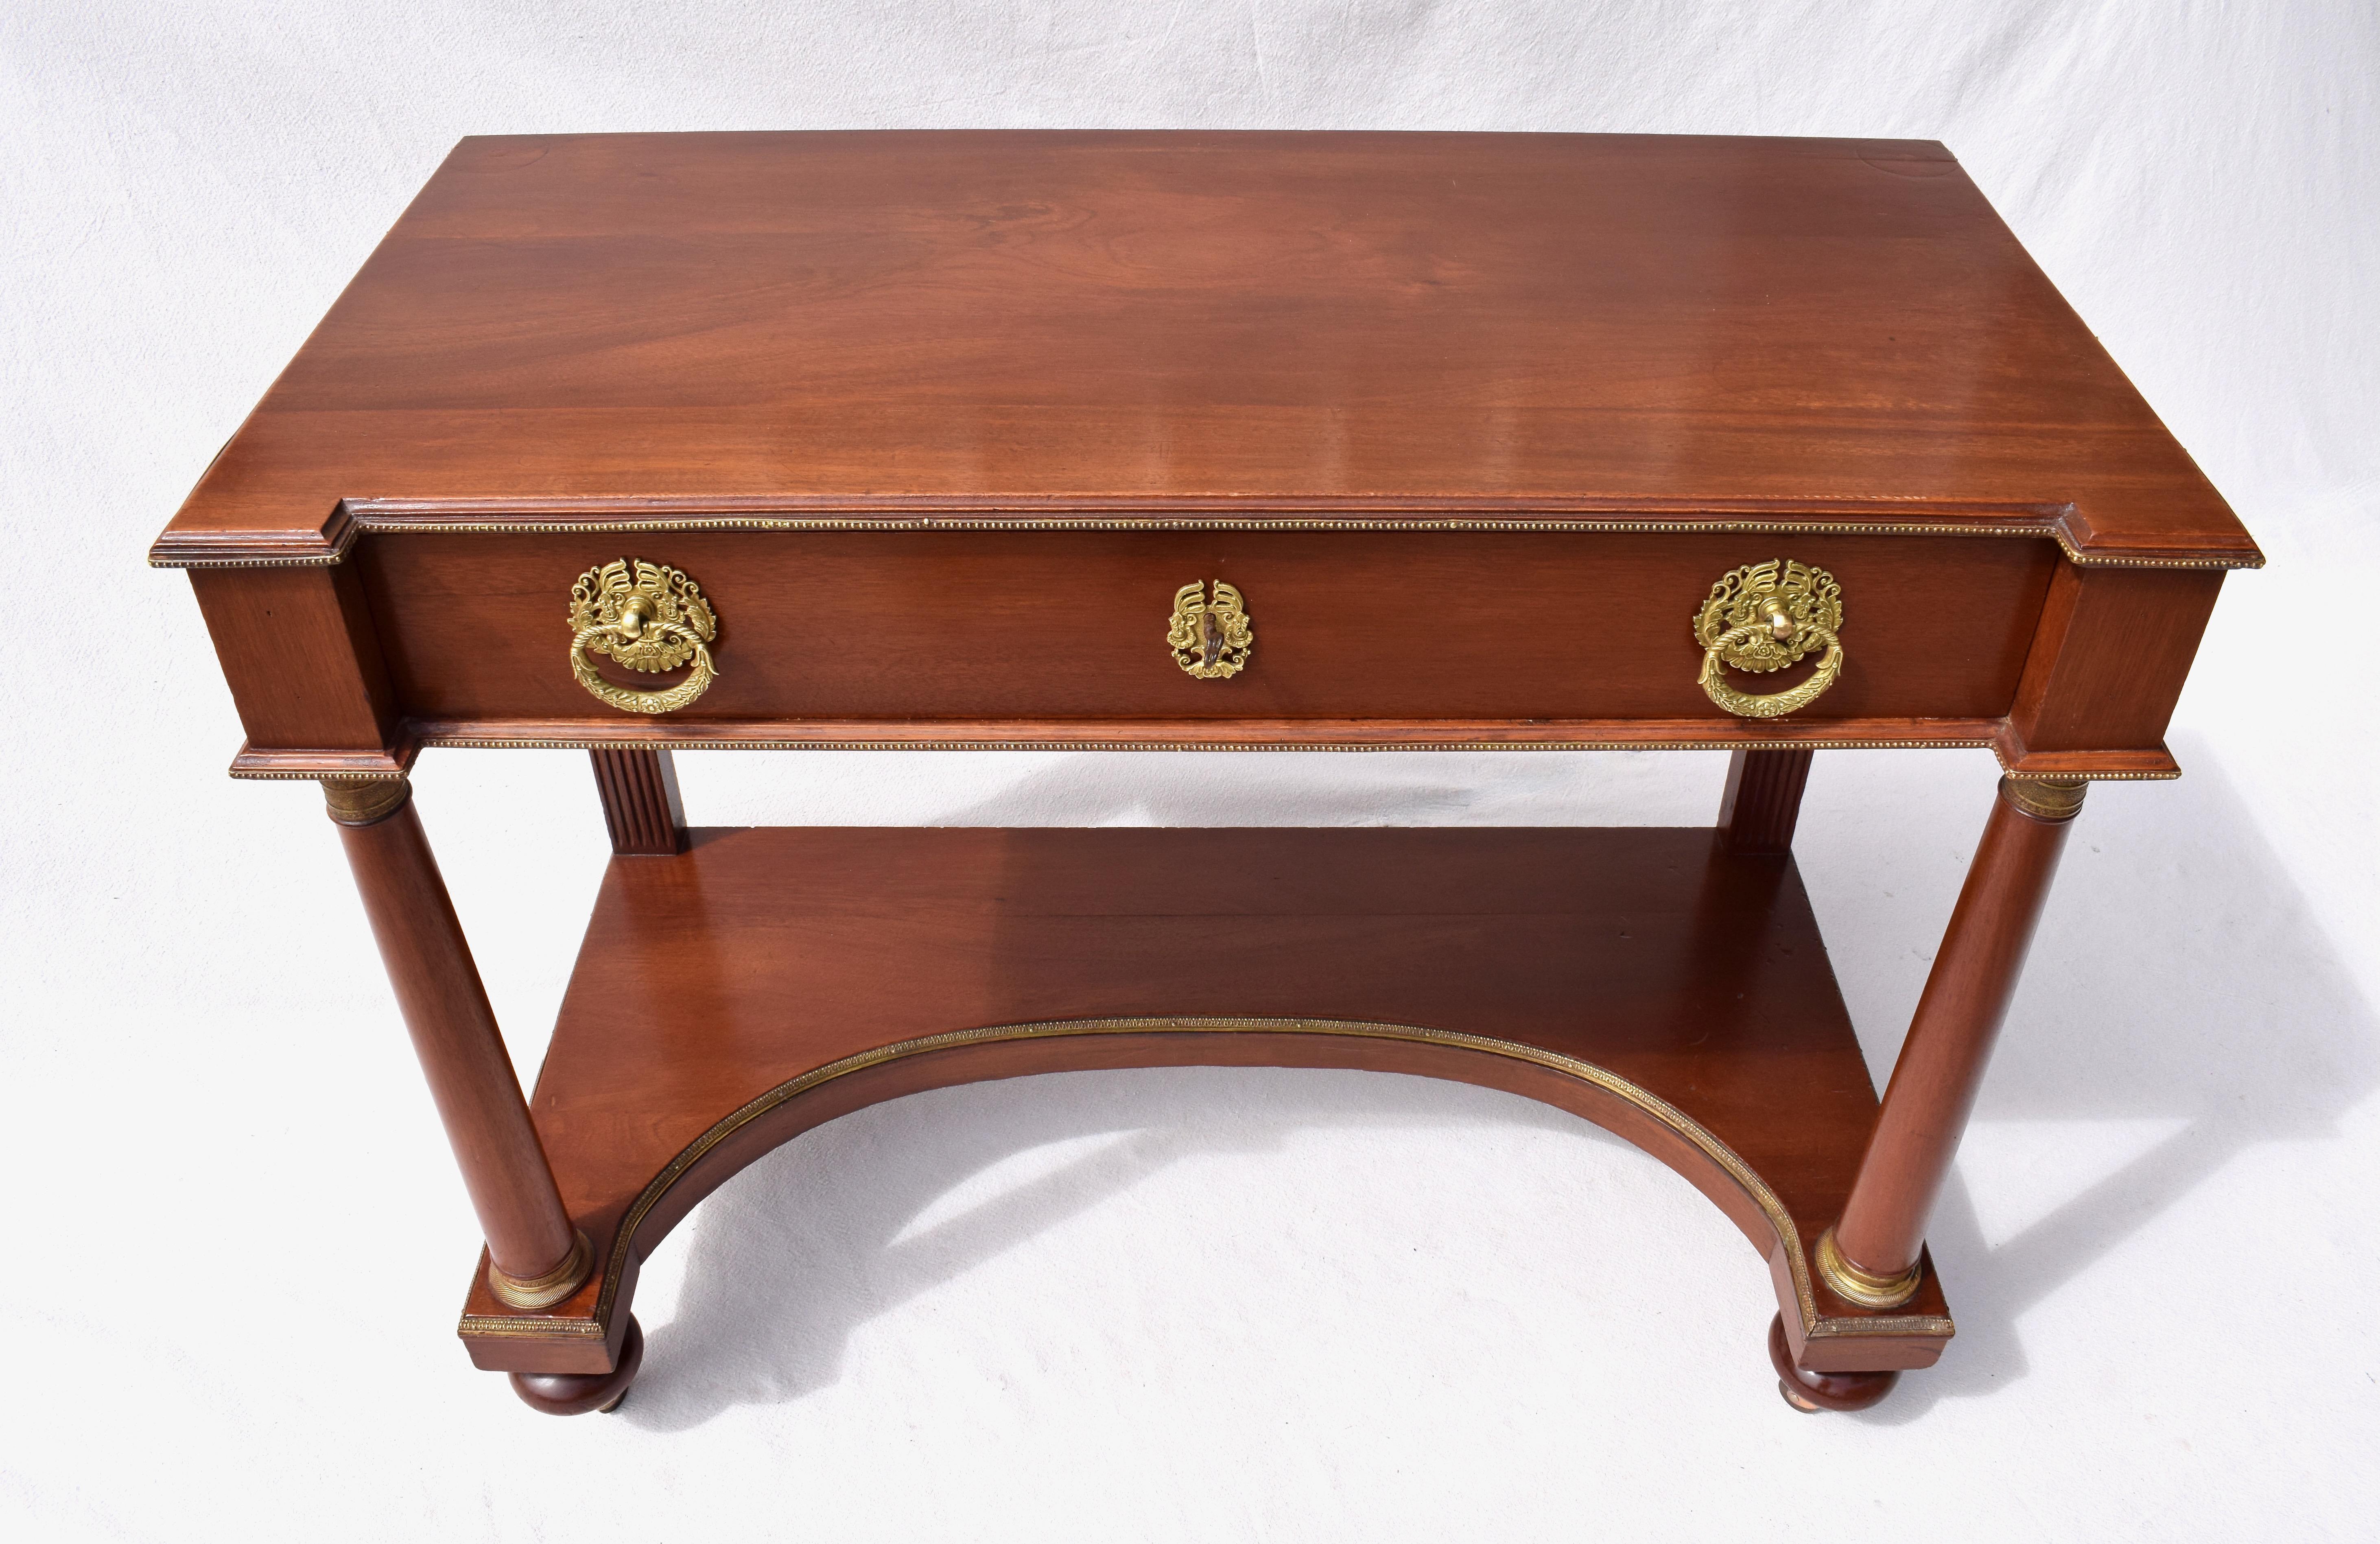 19th century French Empire single drawer console table with all original brass hardware, working lock & key embellished with brass beading throughout. An aesthetically pleasing multifunctional table.